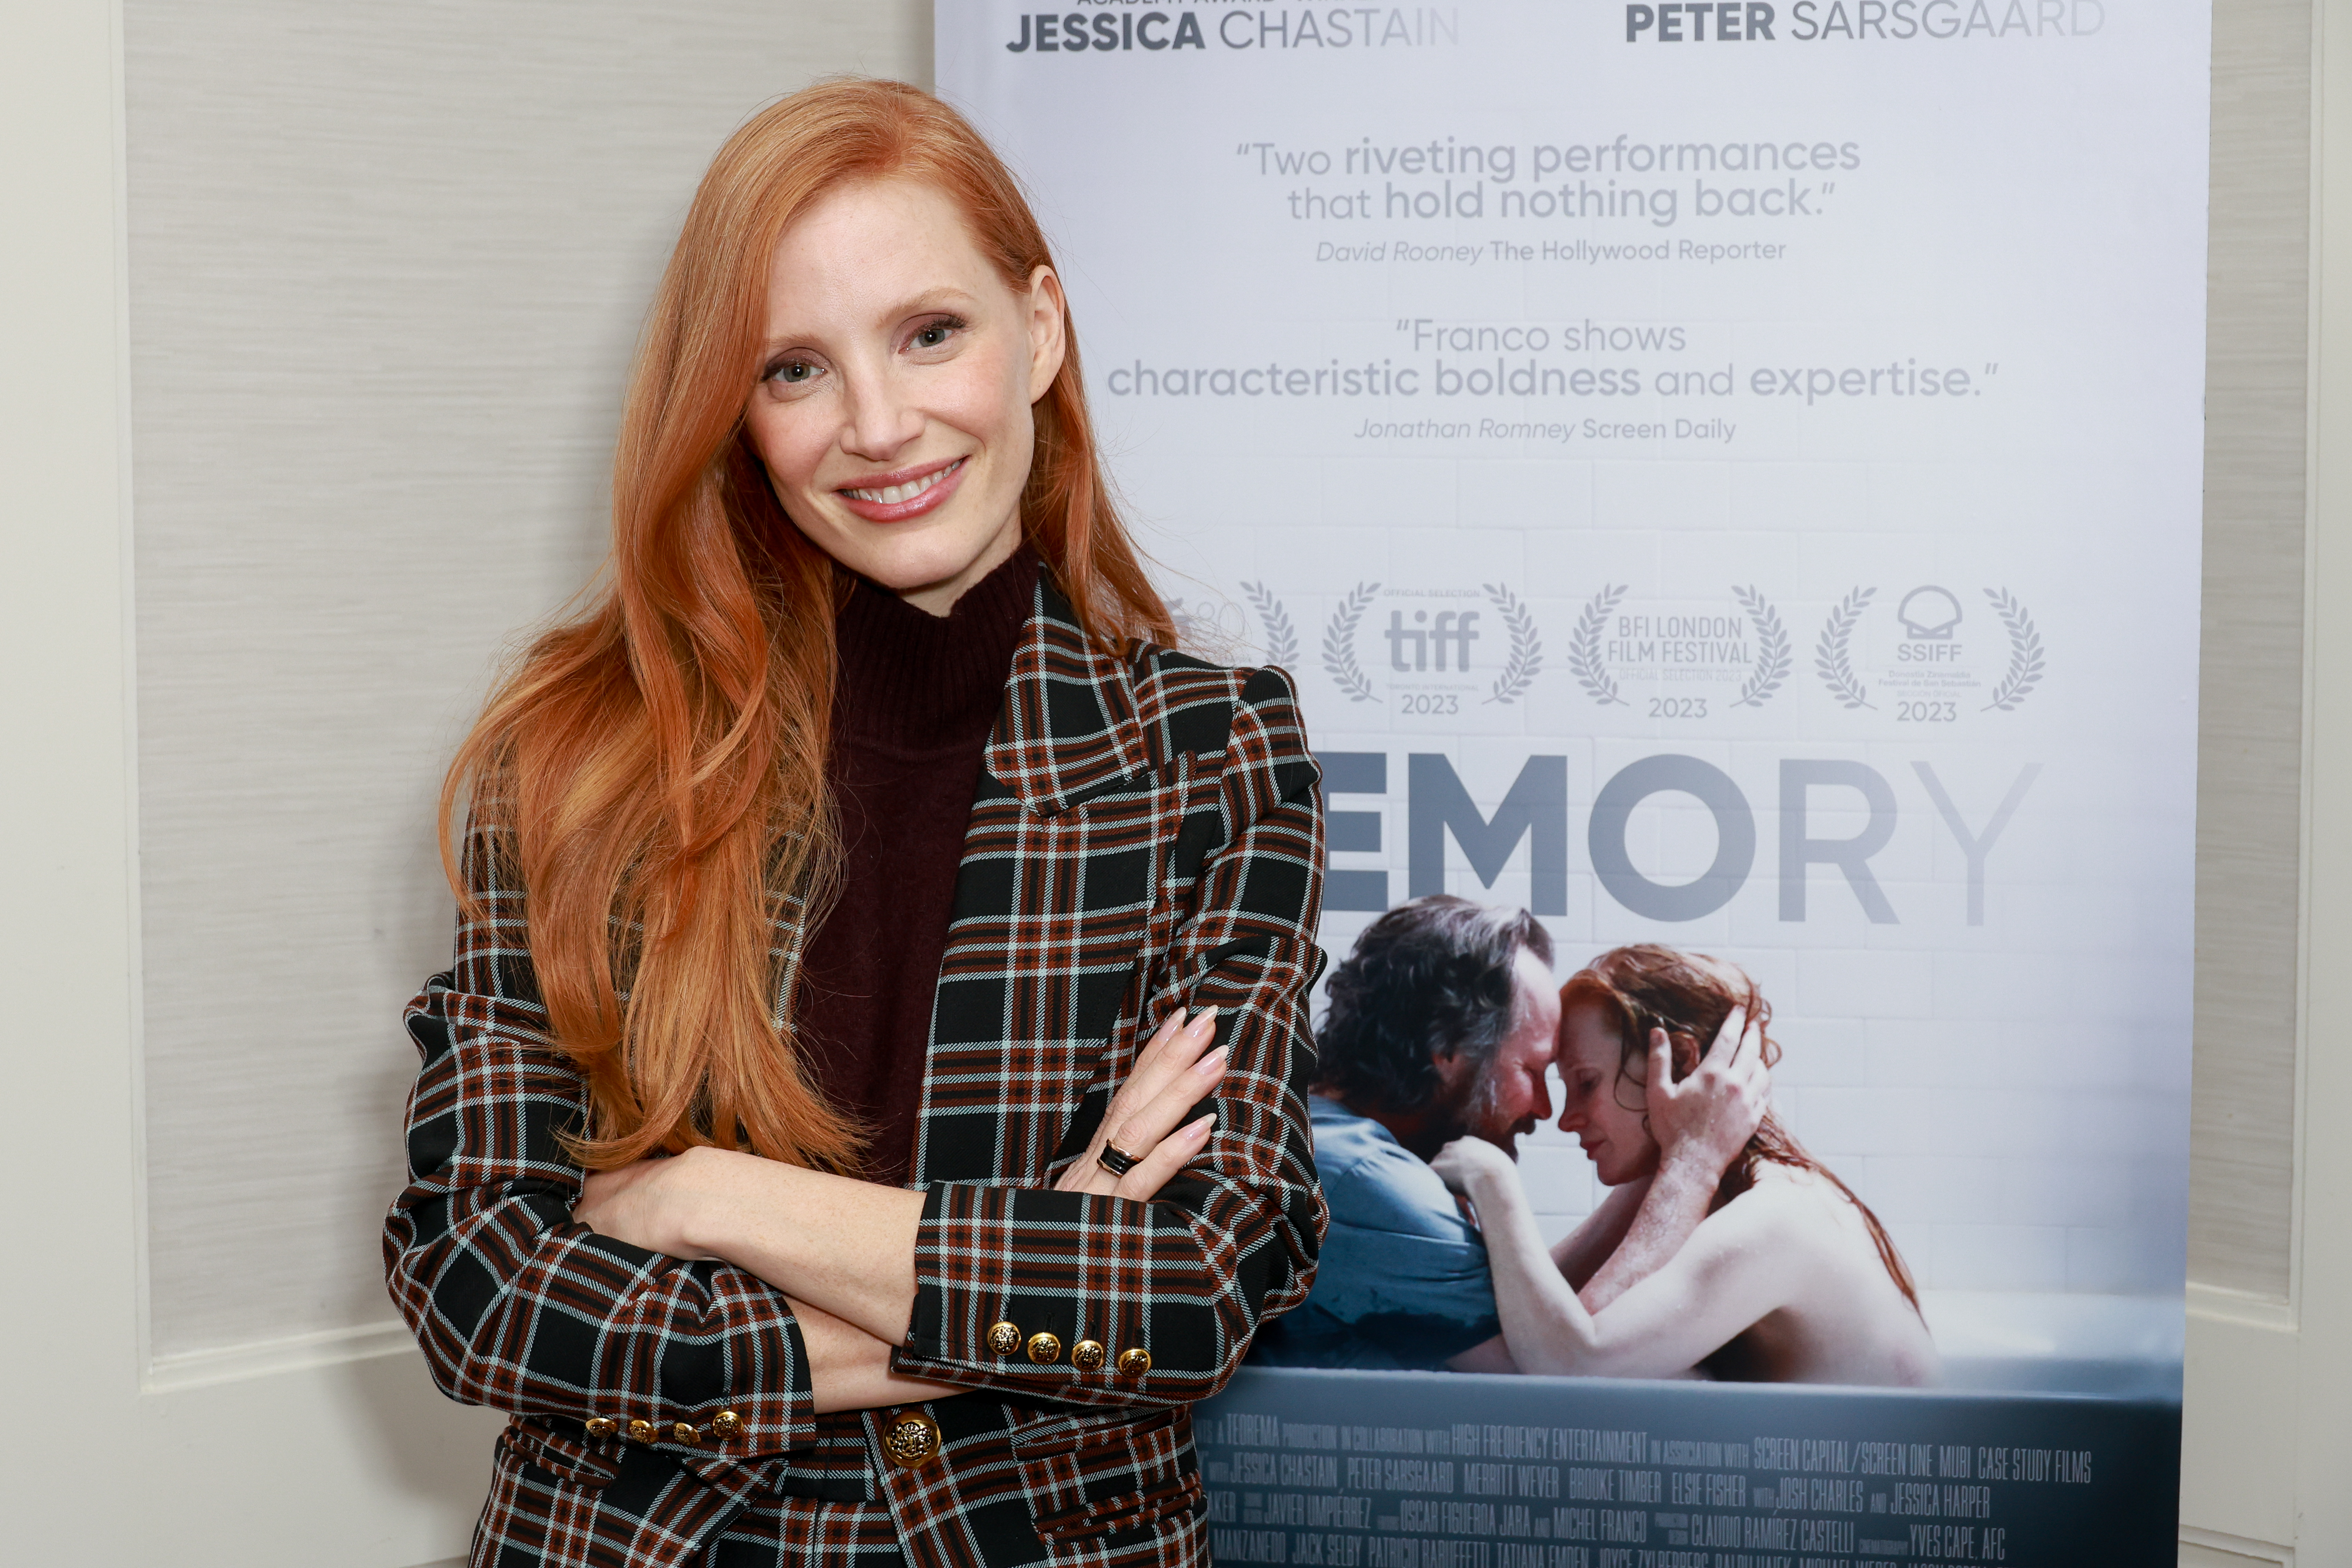 Jessica Chastain attends the "Memory" Q&A in West Hollywood, California on December 05, 2023 | Source: Getty Images